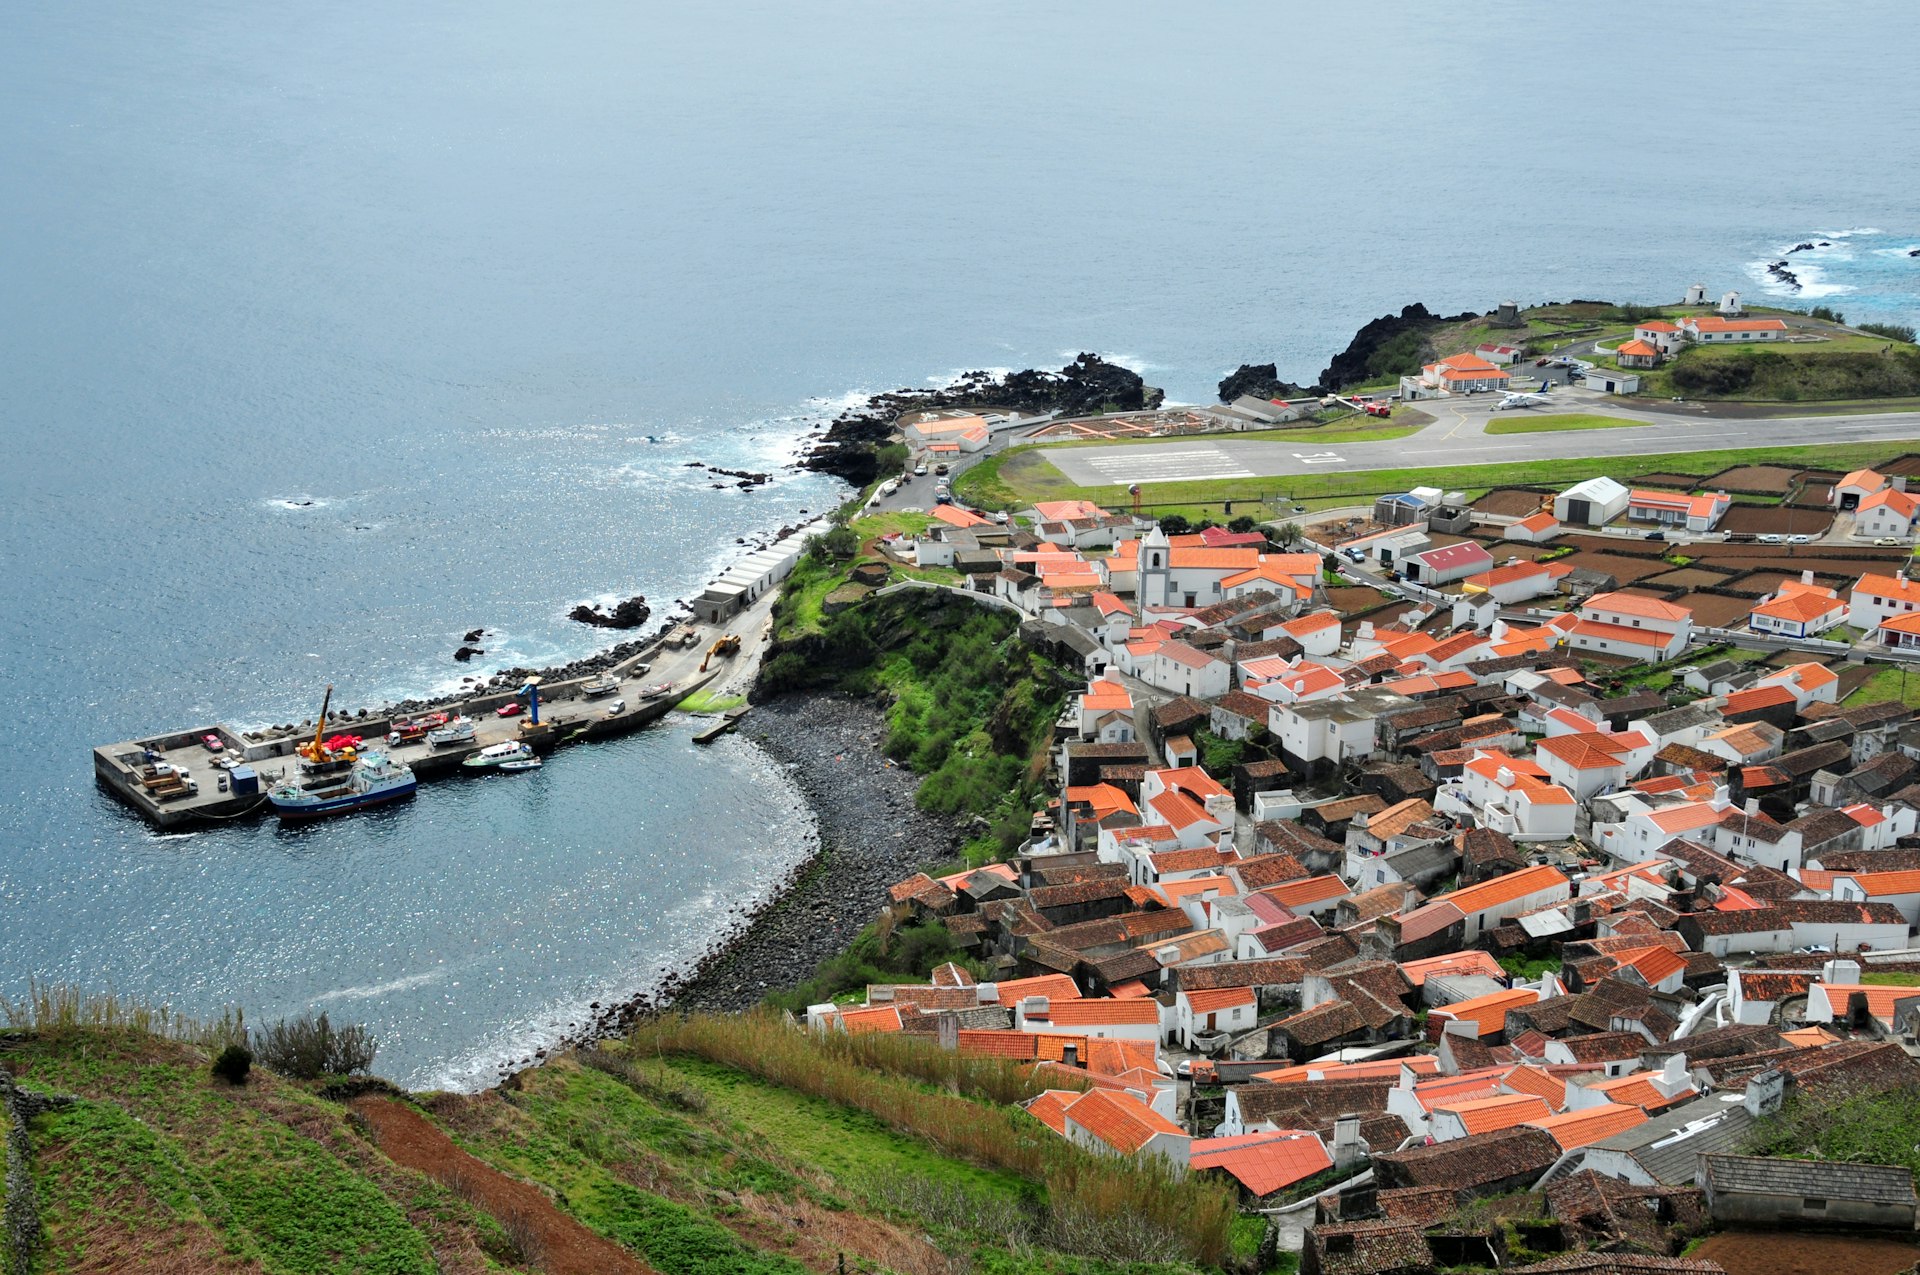 Vila Nova do Corvo, Corvo Island, Azores, Portugal: red roofs of the island's main settlement seen from the hills - view over the town with the volcanic rock beach, boats docked in the harbor's pier